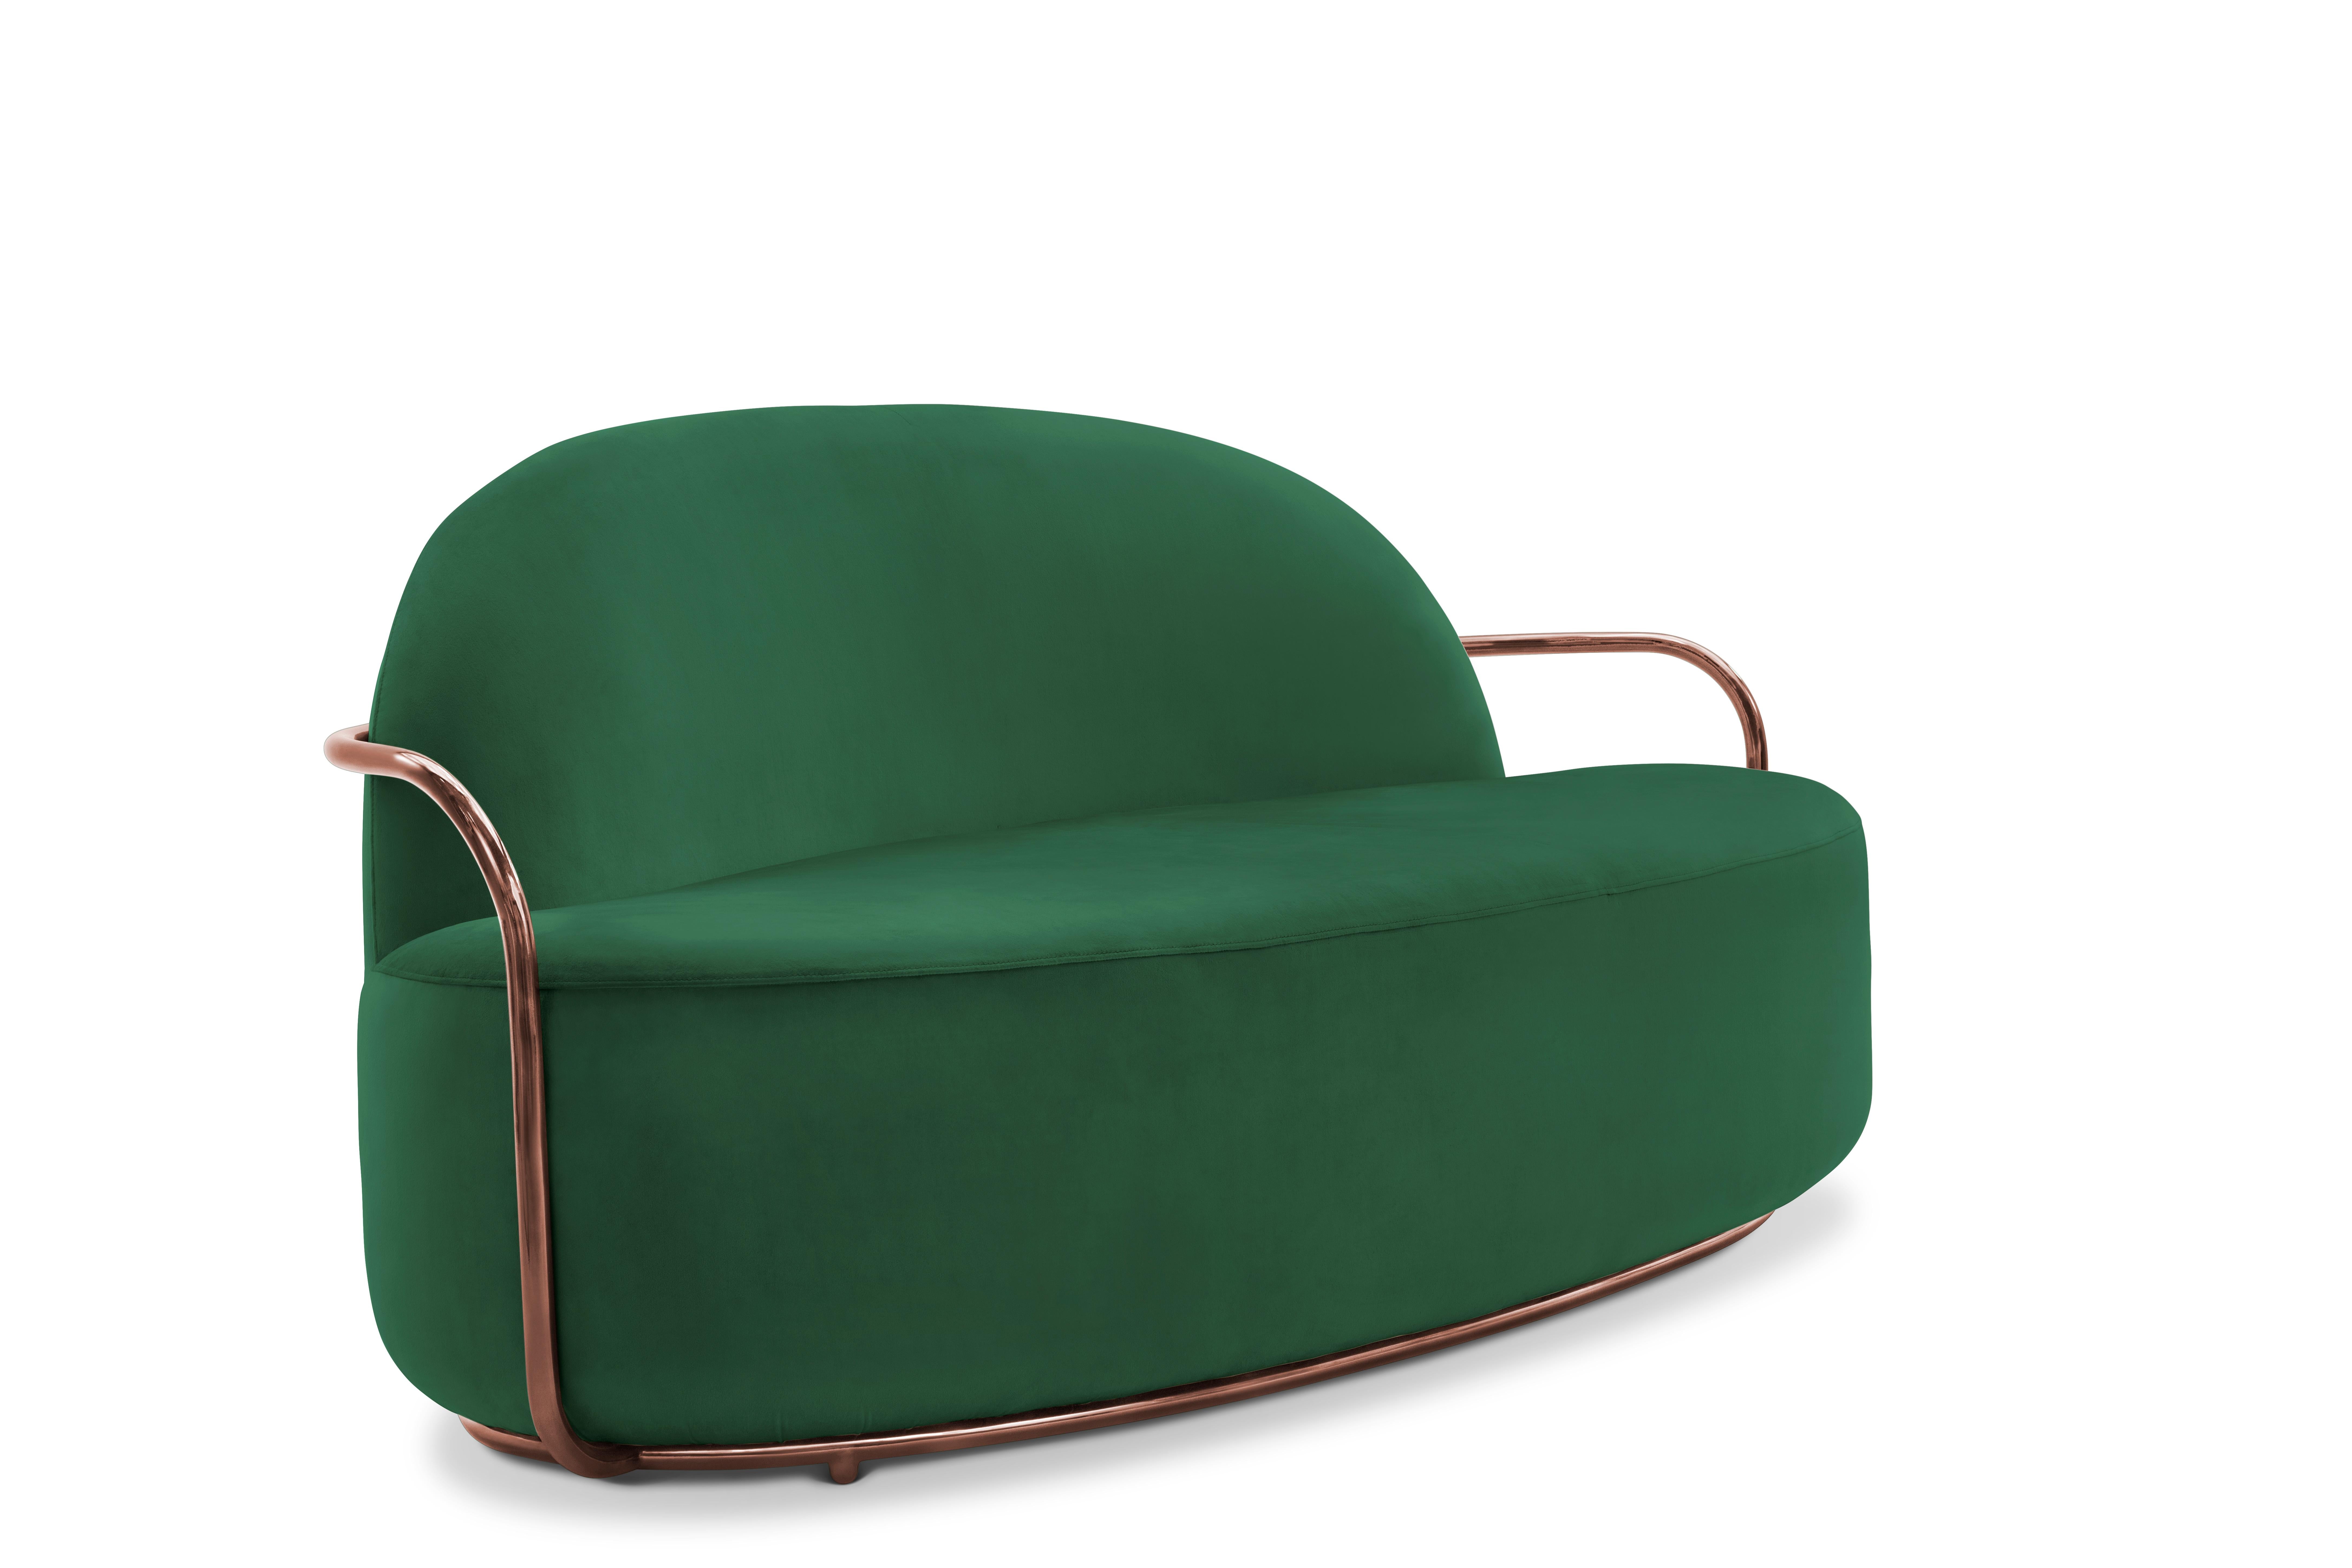 The rich deep green velvet contrasted with rose gold metal arms accentuates the fluid lines of the Orion 3 Seat Sofa with Plush Green Velvet and Rose Gold Arms by Nika Zupanc.

Nika Zupanc, a strikingly renowned Slovenian designer, never shies away